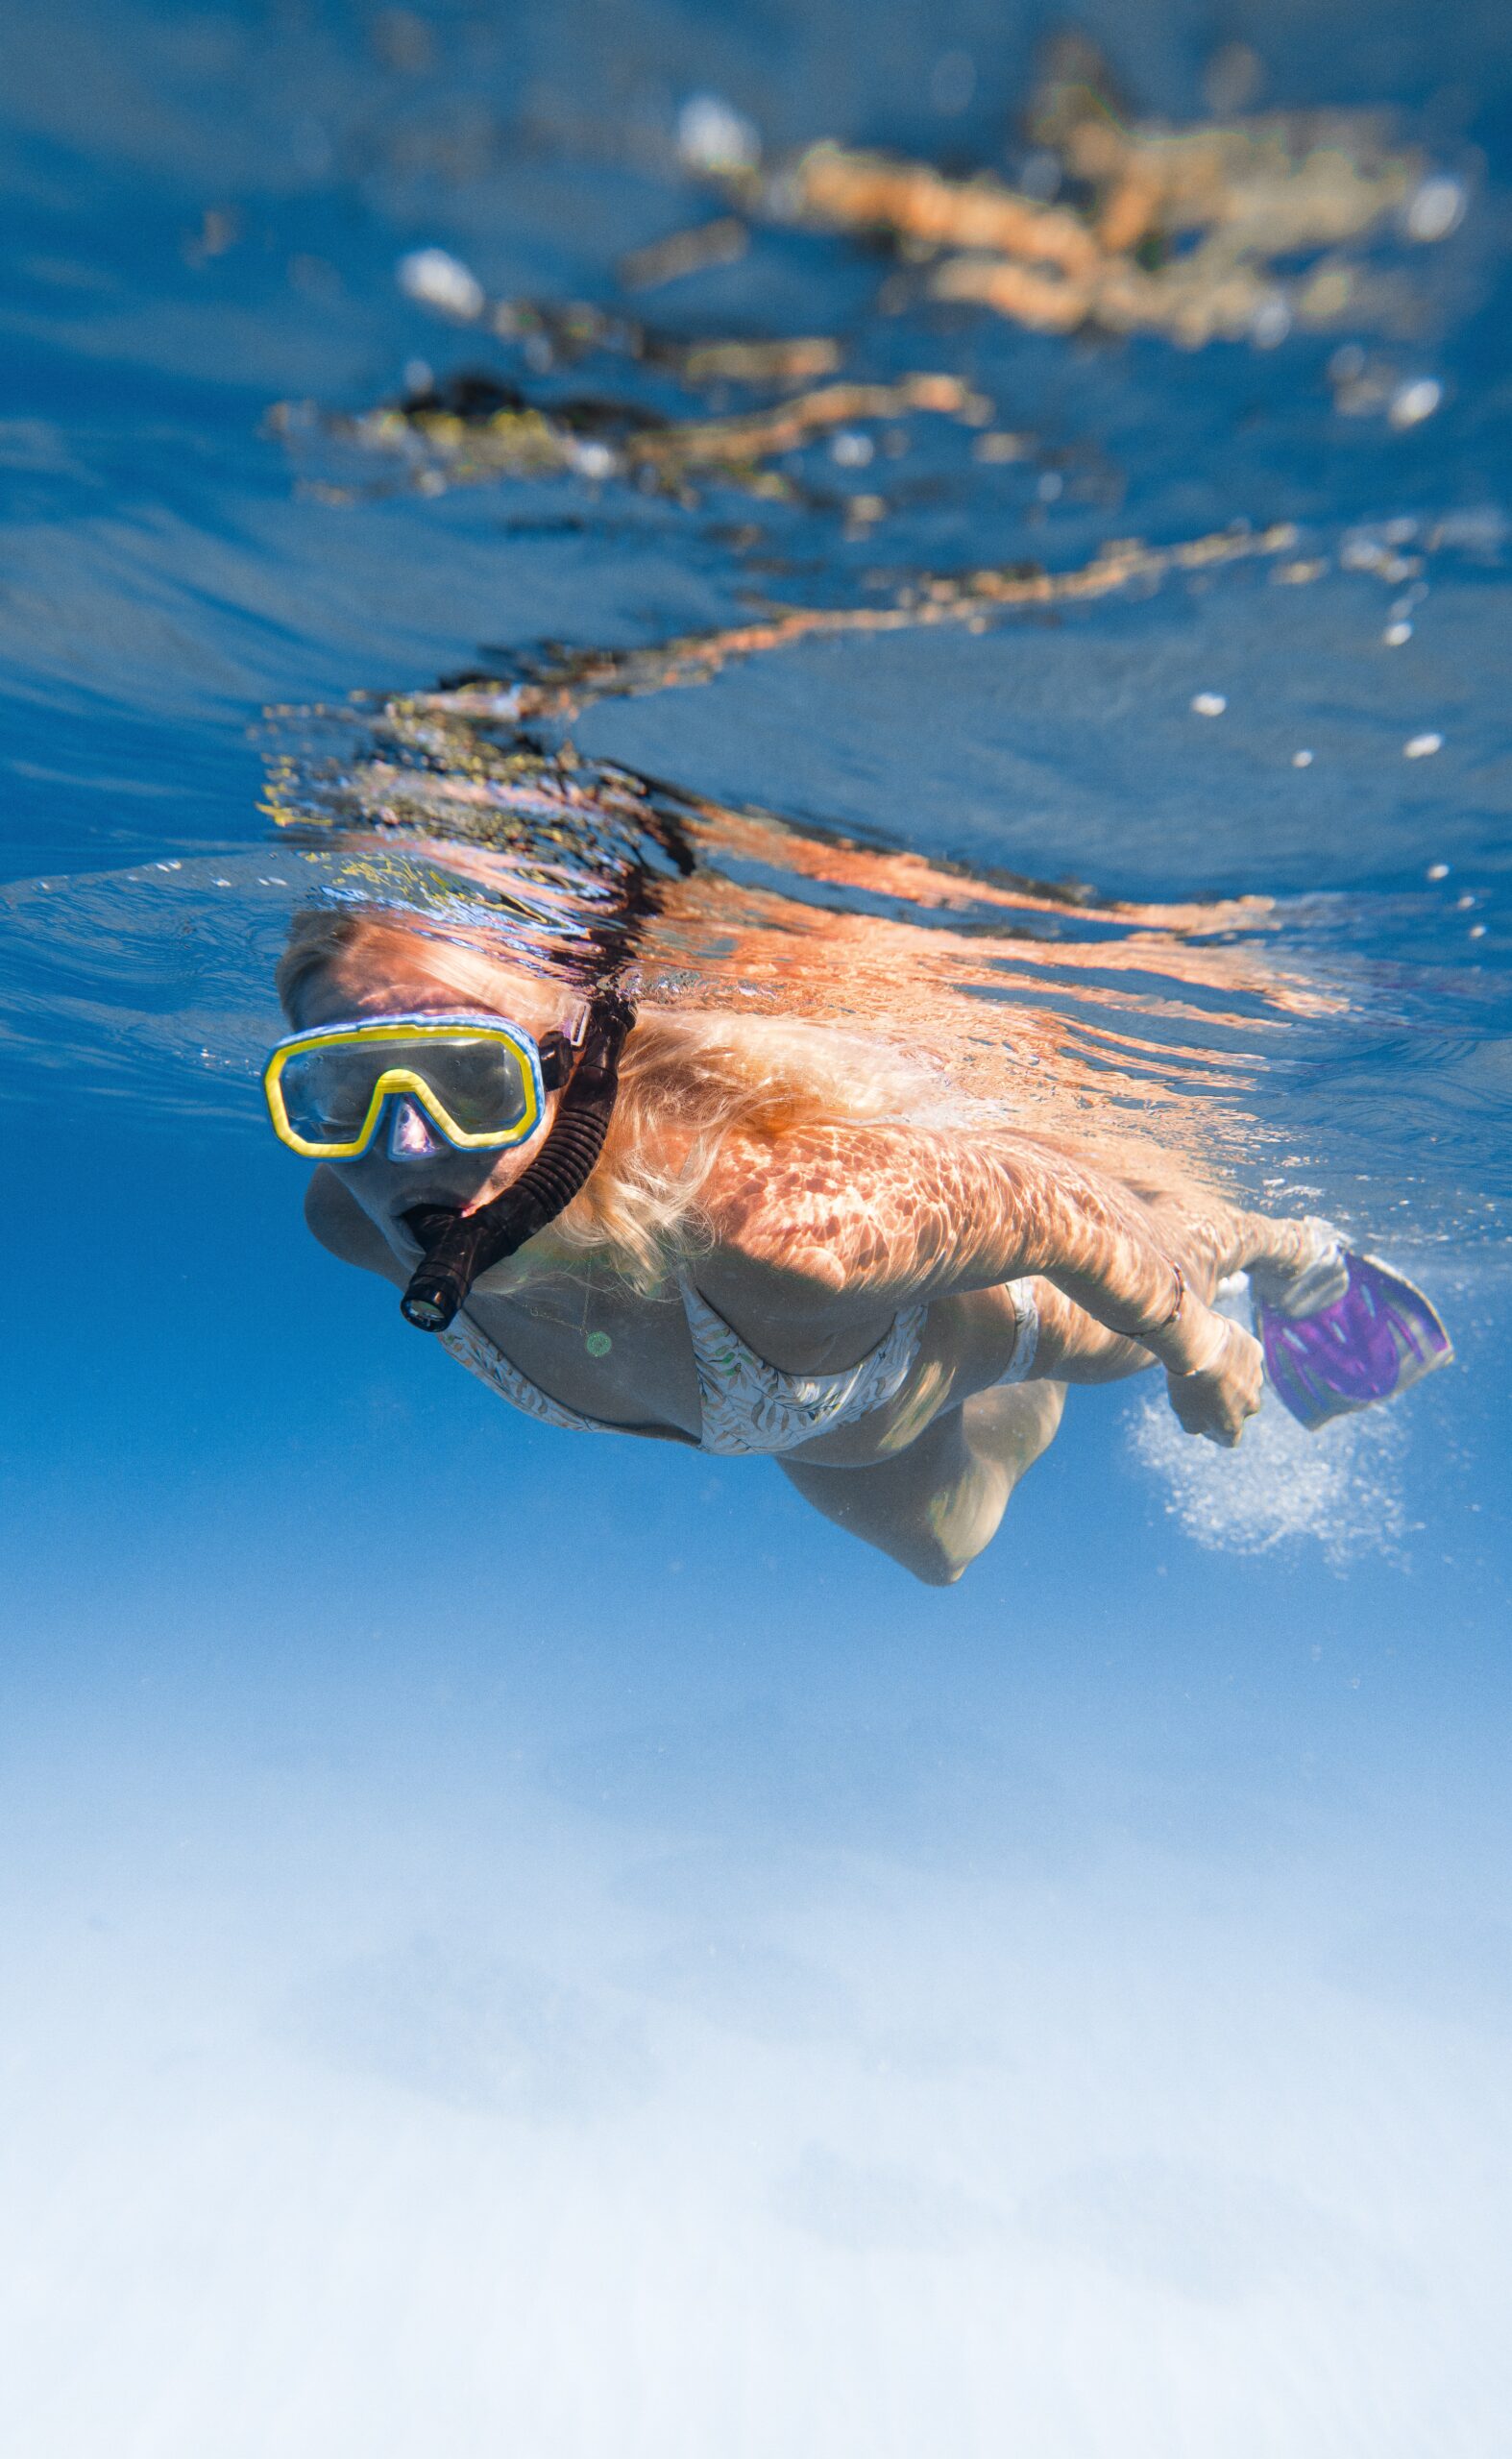 Can You Go Snorkeling With Glasses?